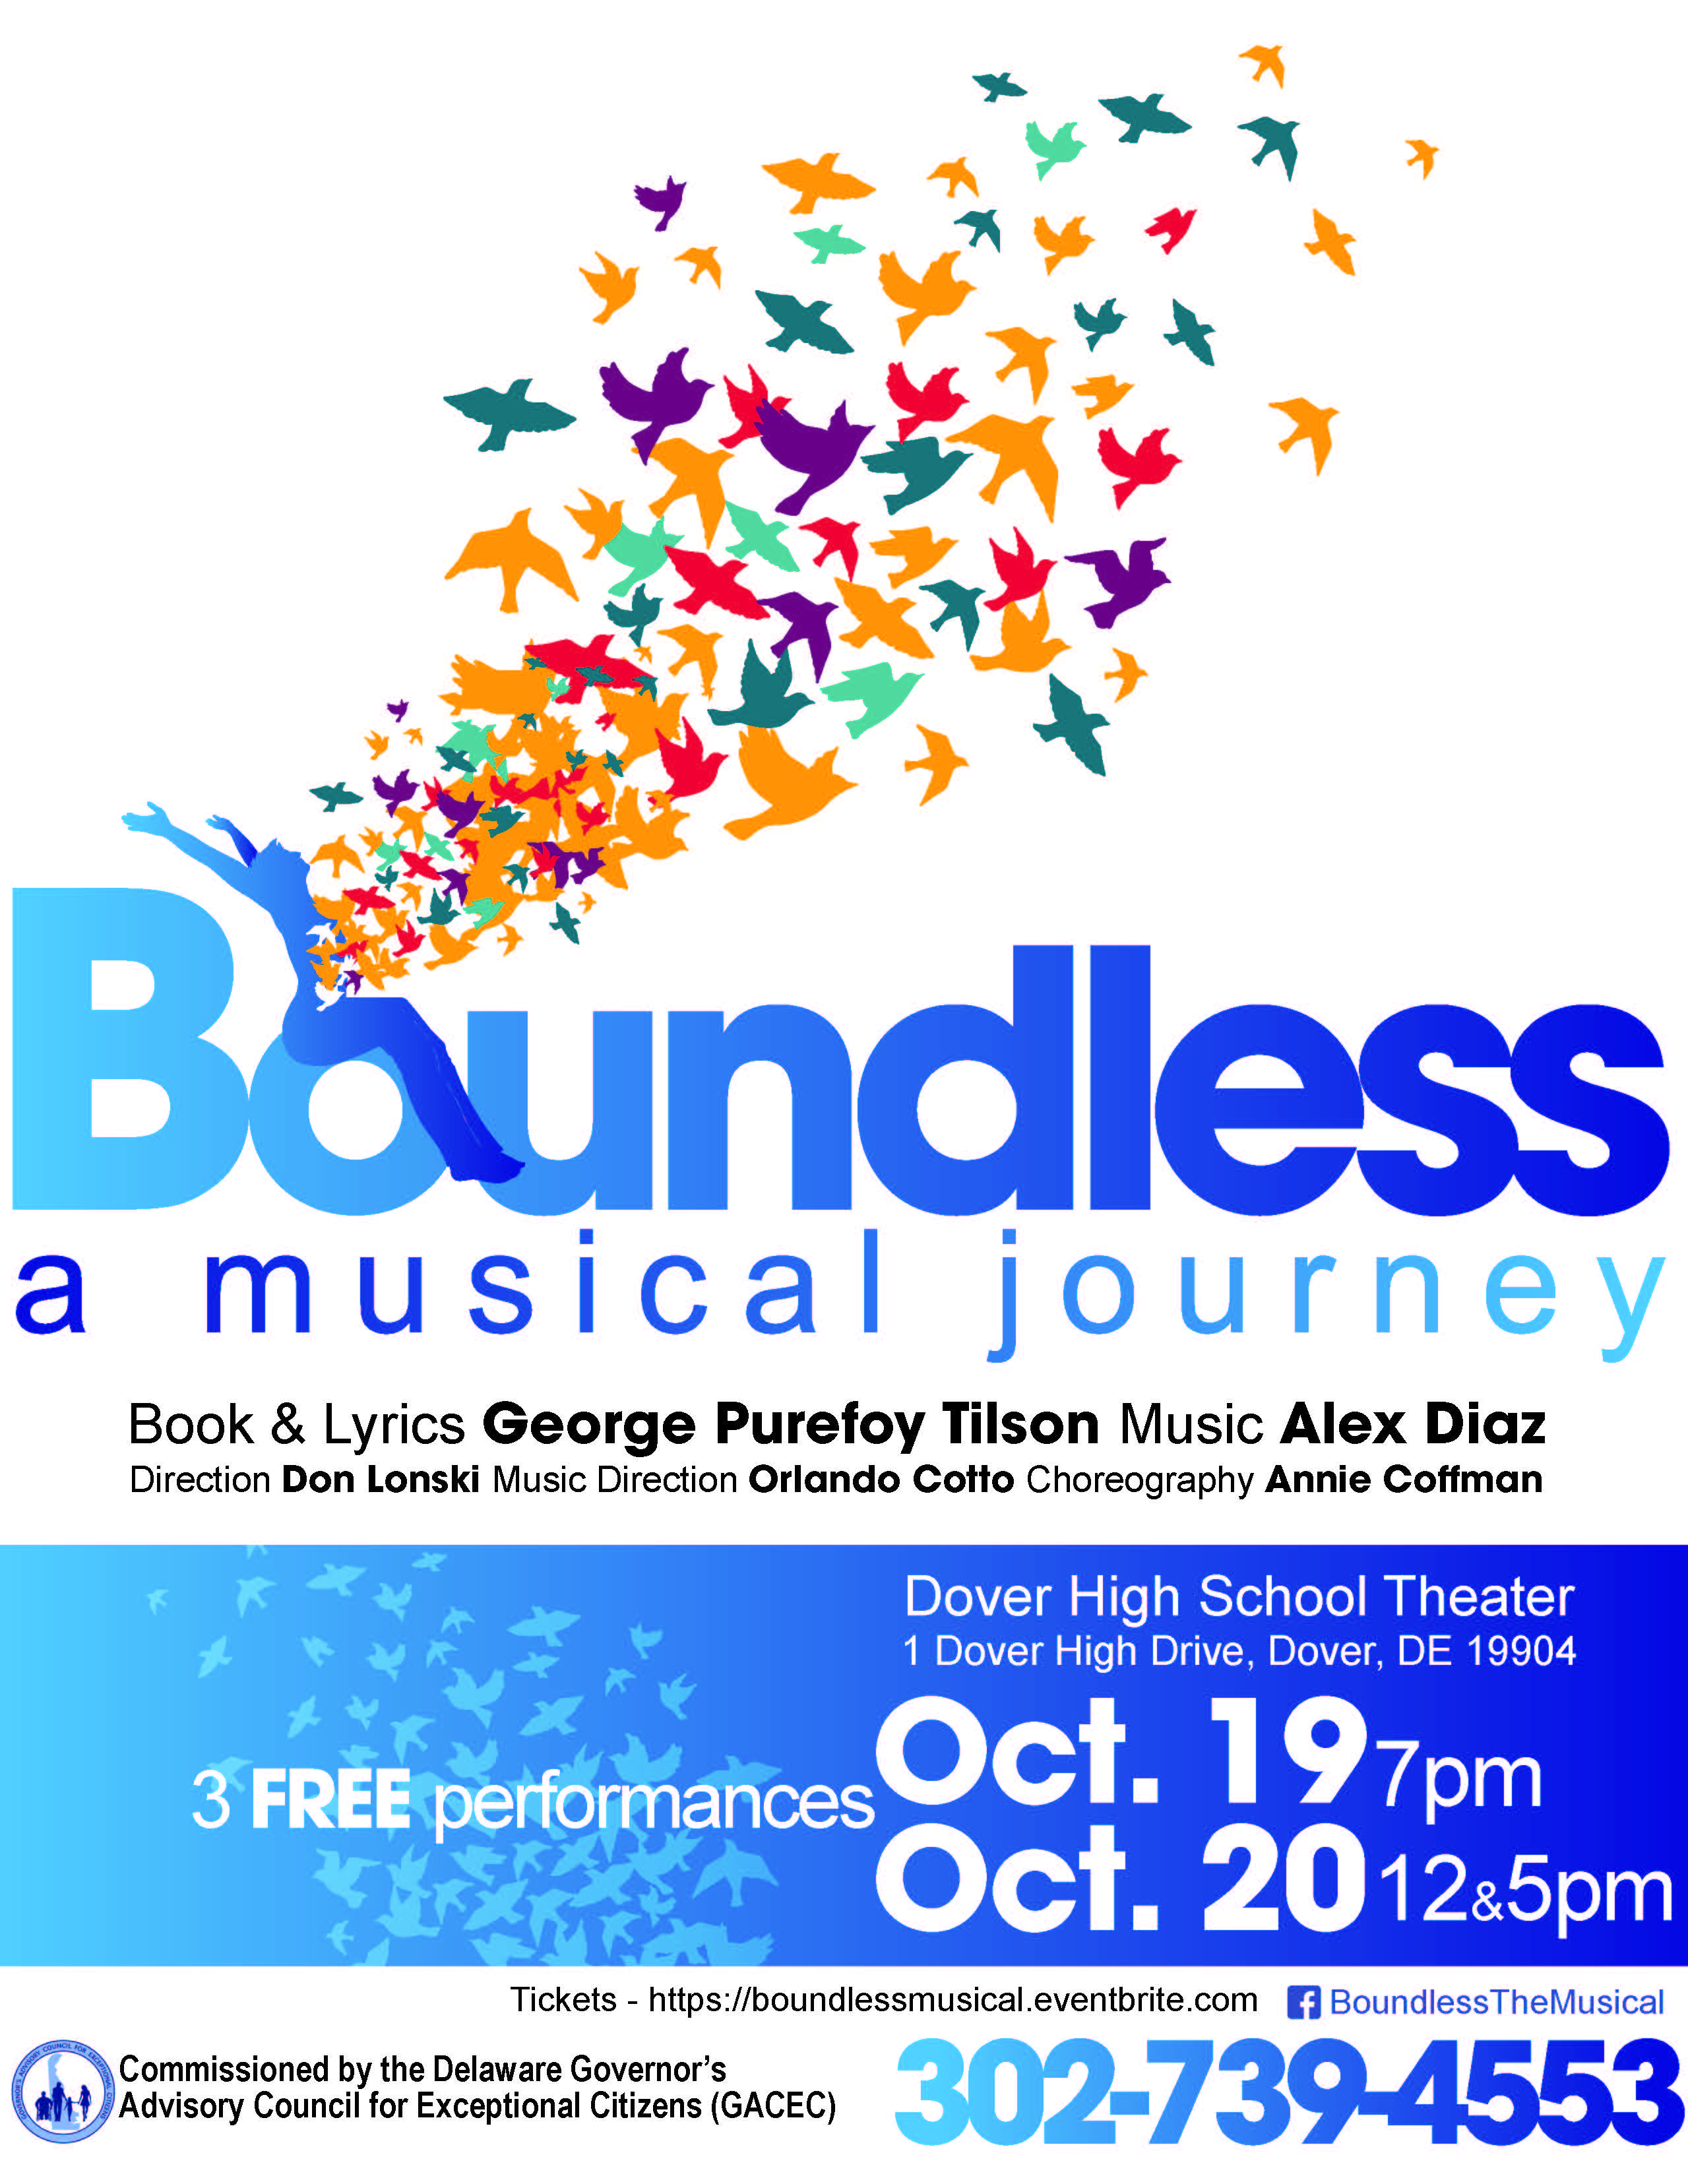 Picture of "Boundless a Musical Journey" promo flyer